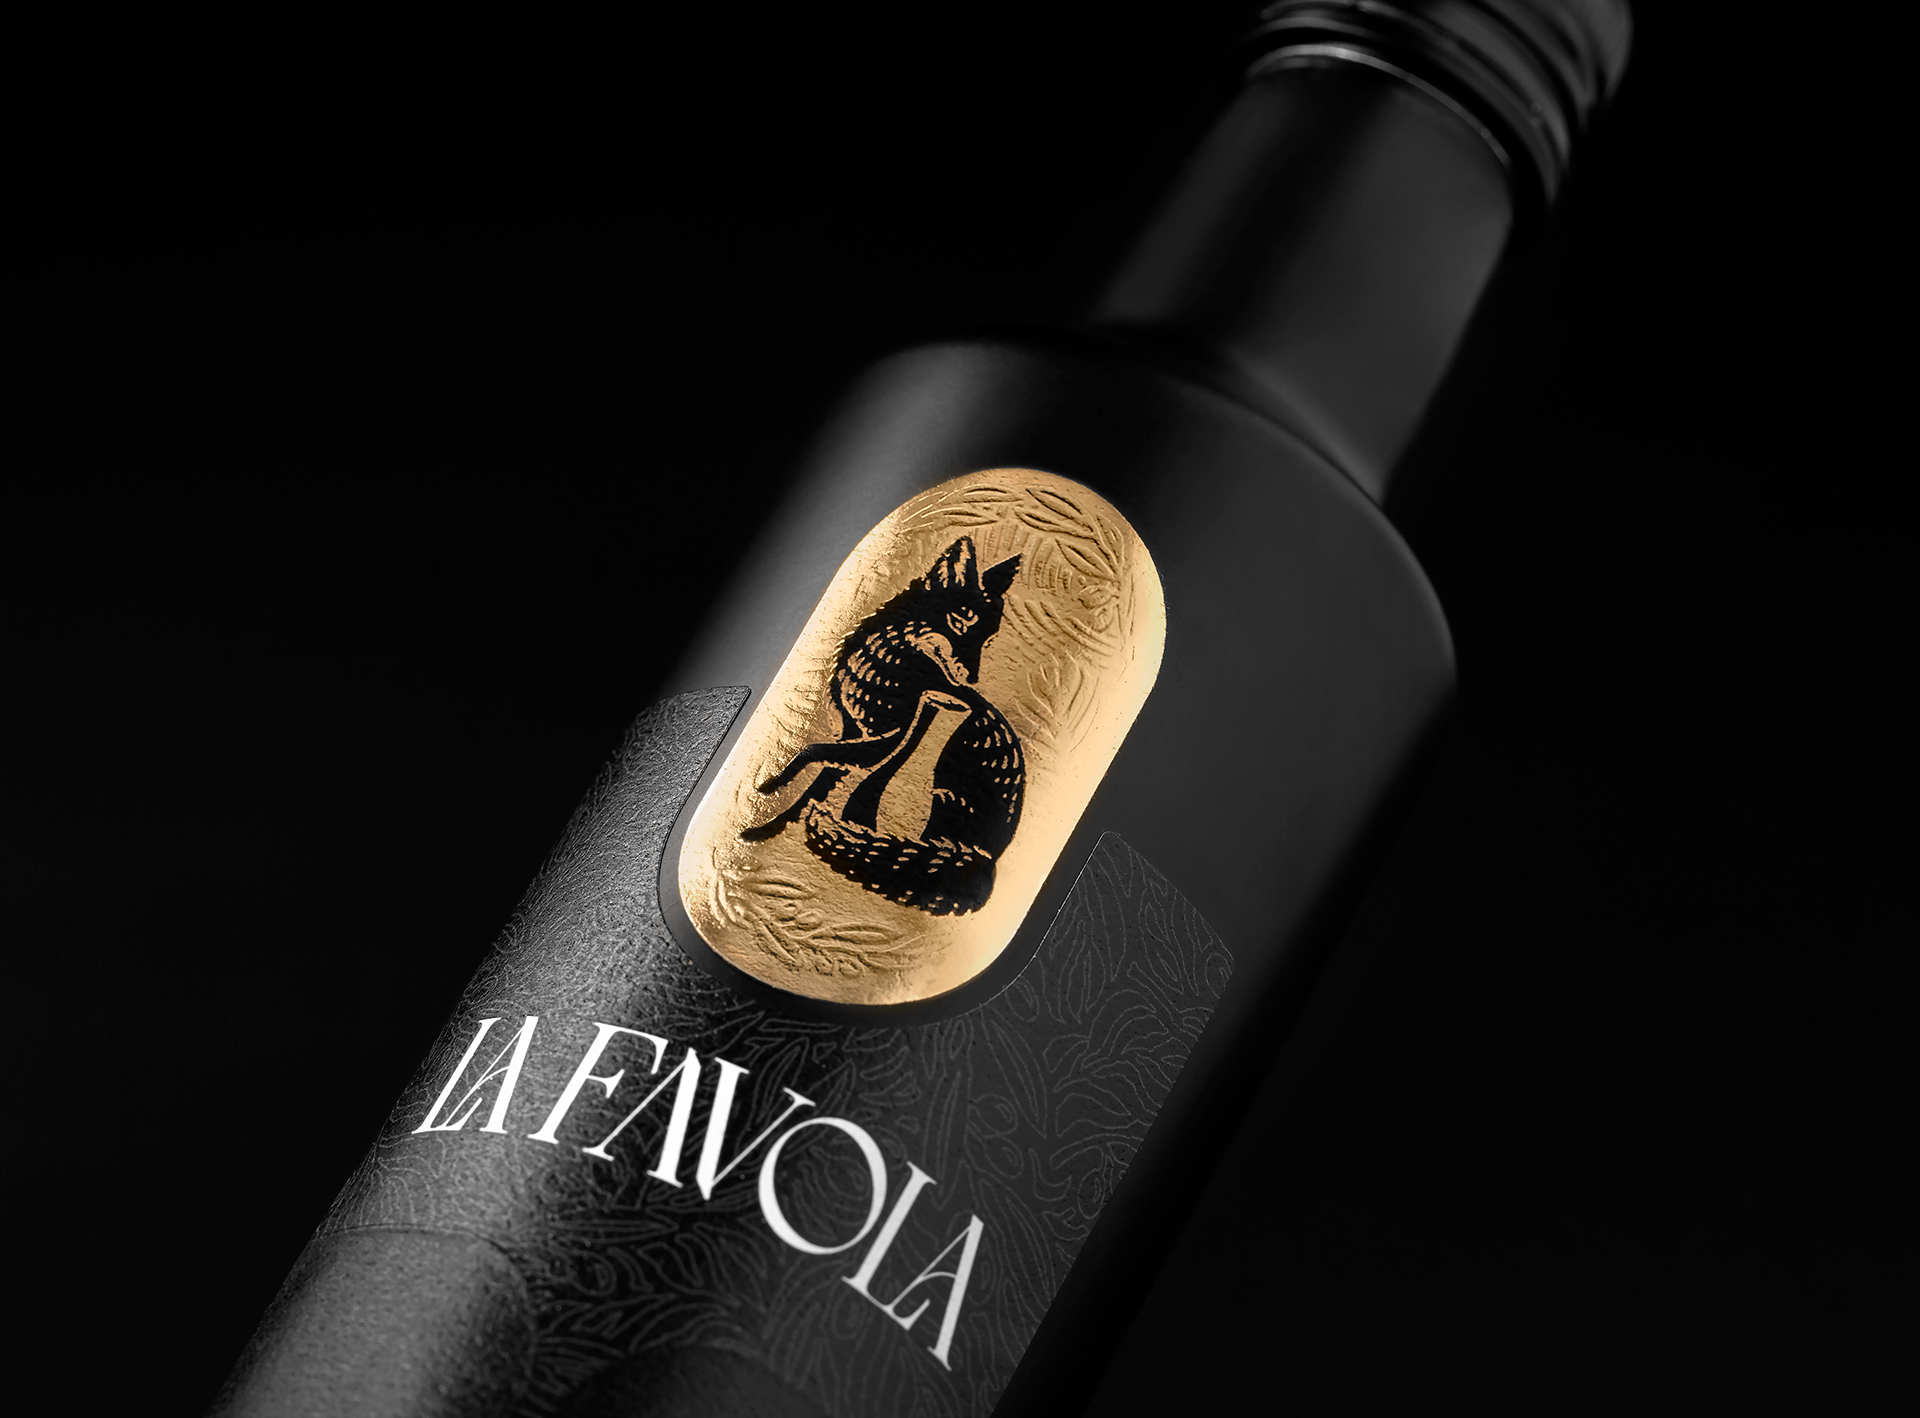 Holy Studio Created Packaging Design for La Favola Extra Virgin Olive Oil Born in Southern Brazil